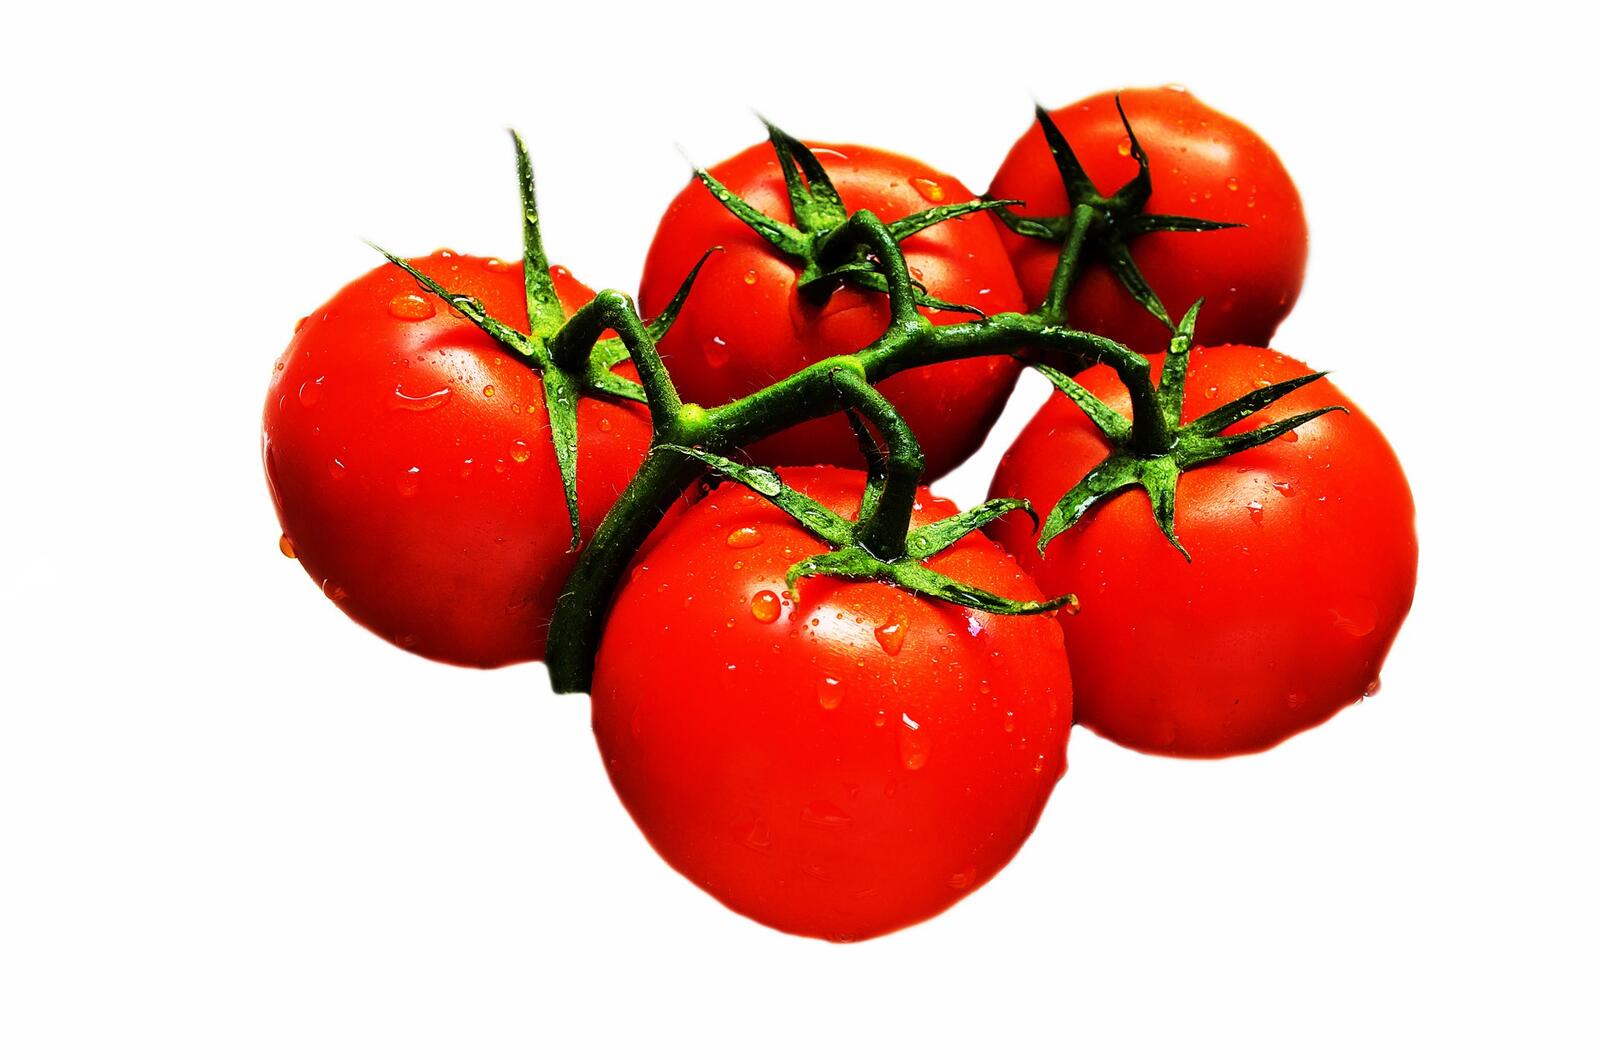 Free photo A picture of red tomatoes